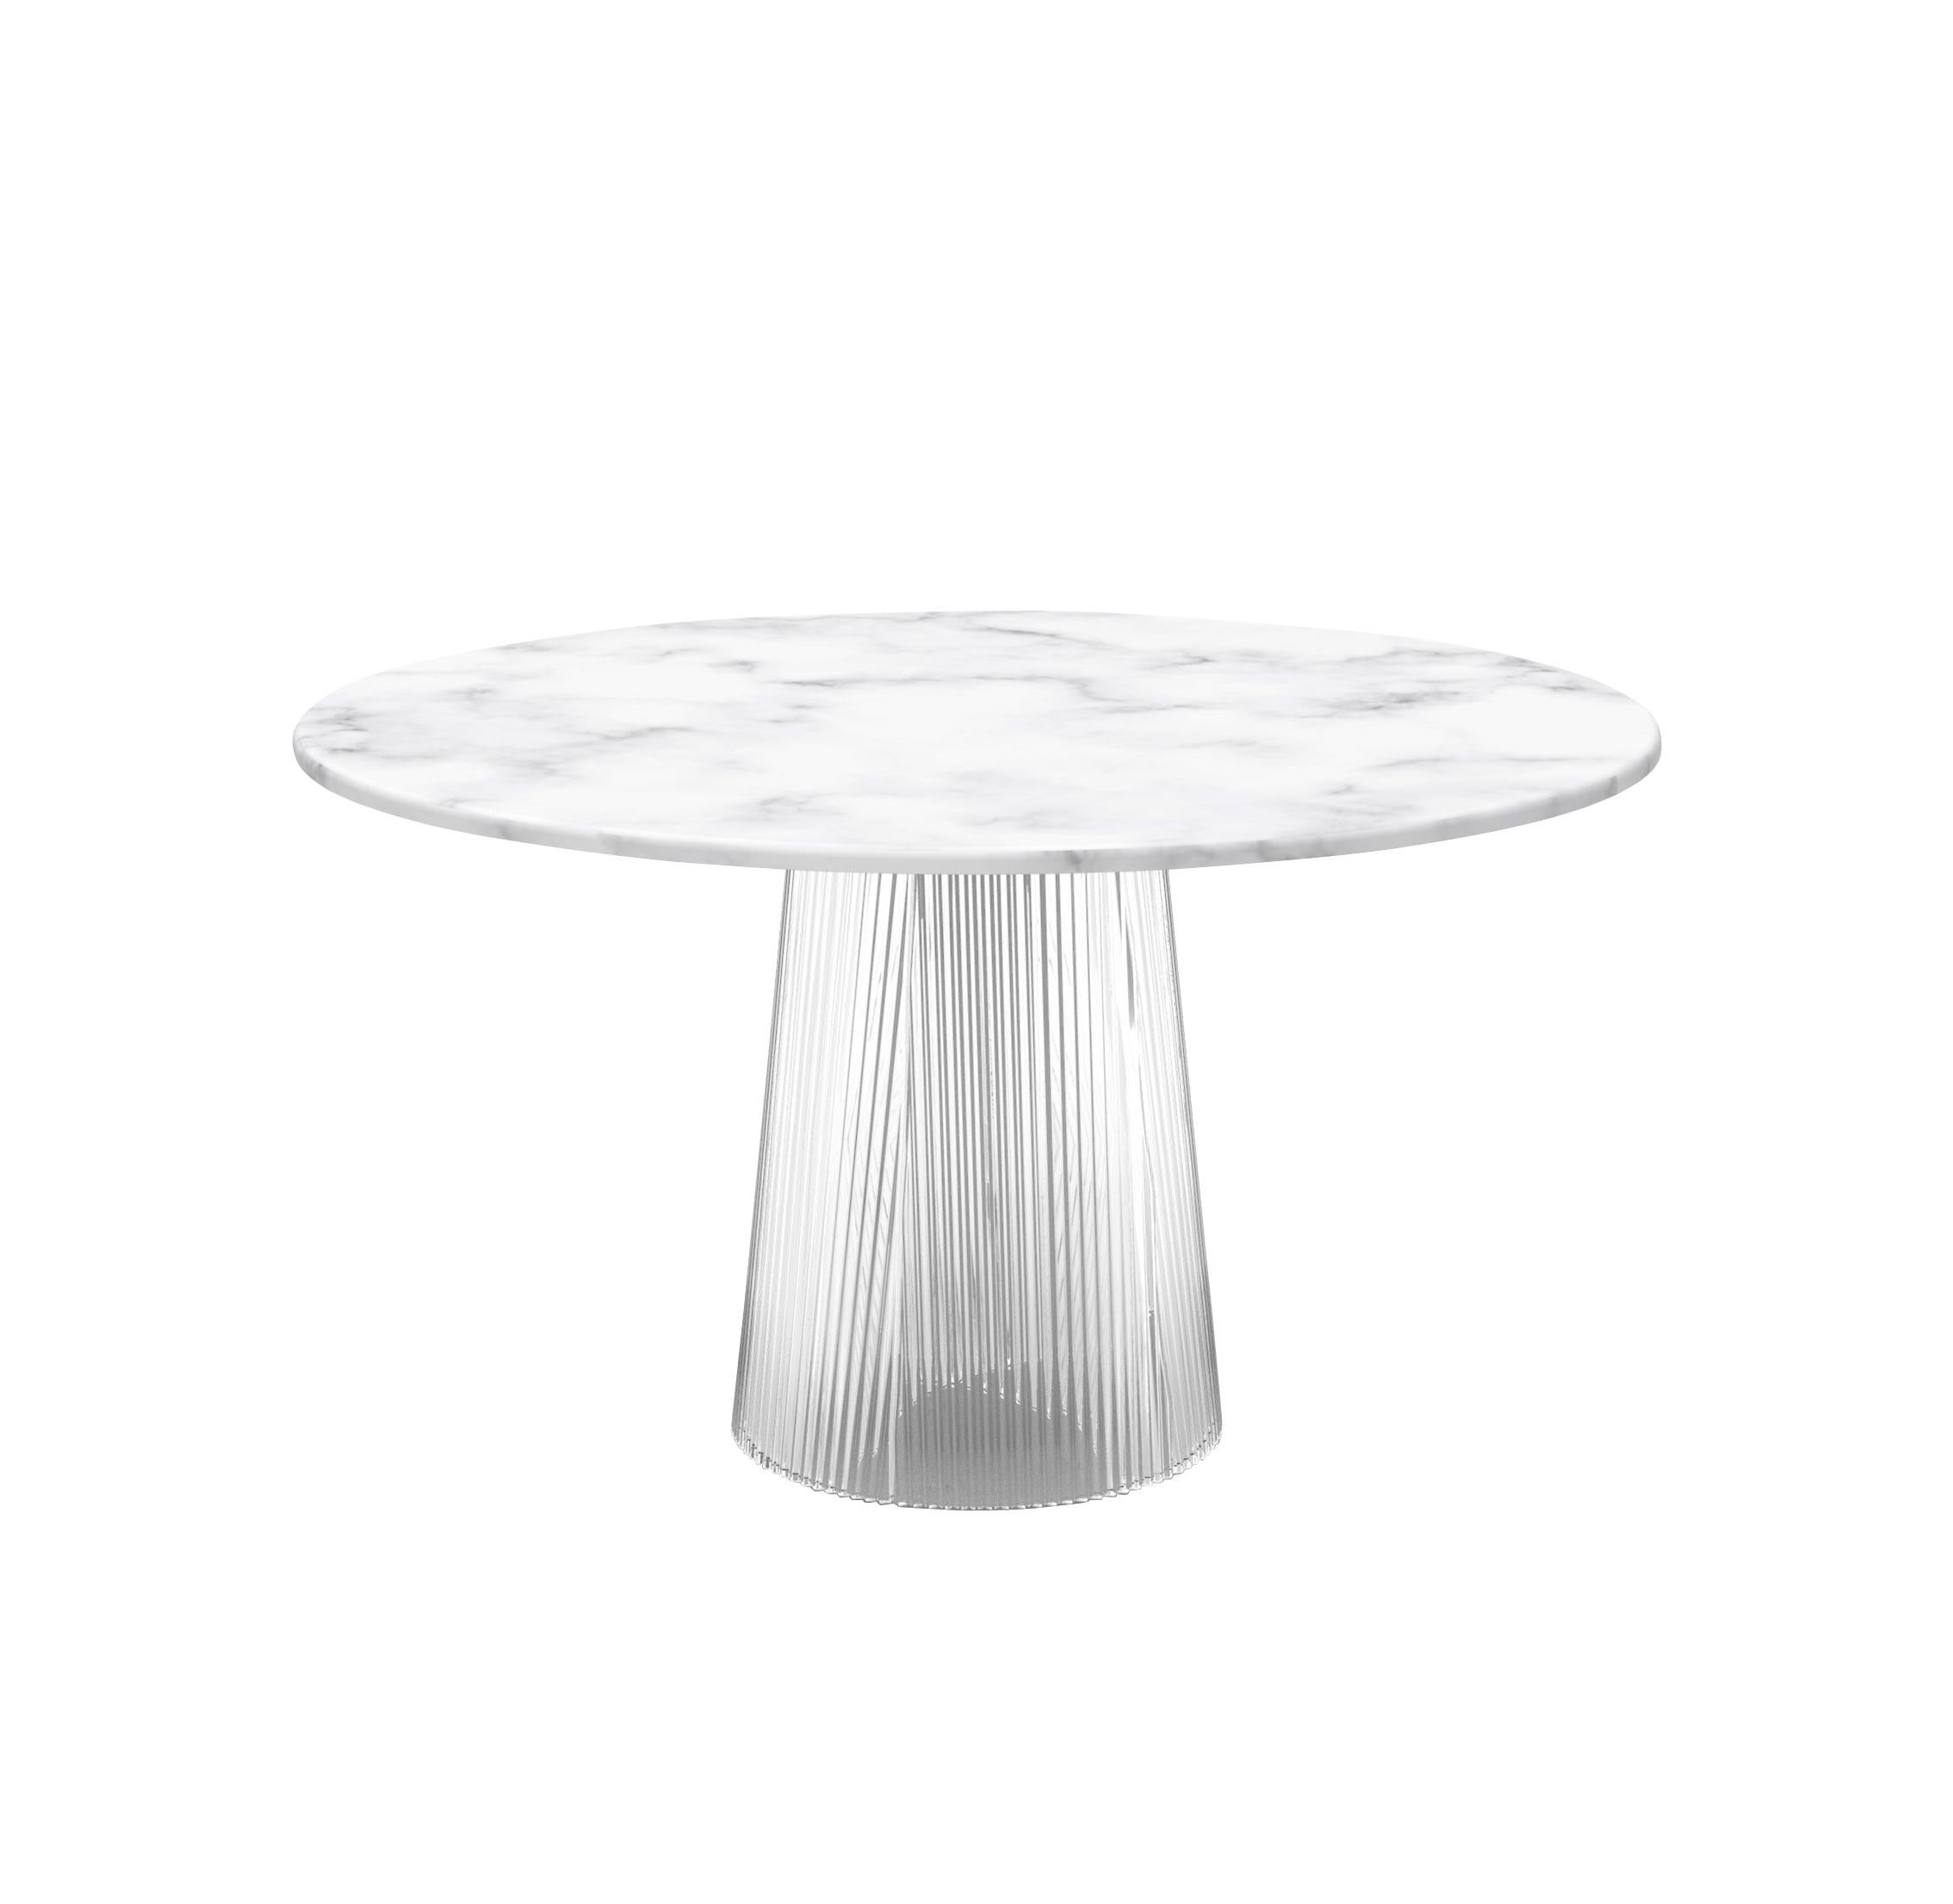 Bent dining table medium white transparent by Pulpo
Dimensions: D 130 x H 74 cm
Materials: casted glass, carrara, black nero or light green marble table top.

Also available in different finishes and dimensions.

Two kinds of Material united